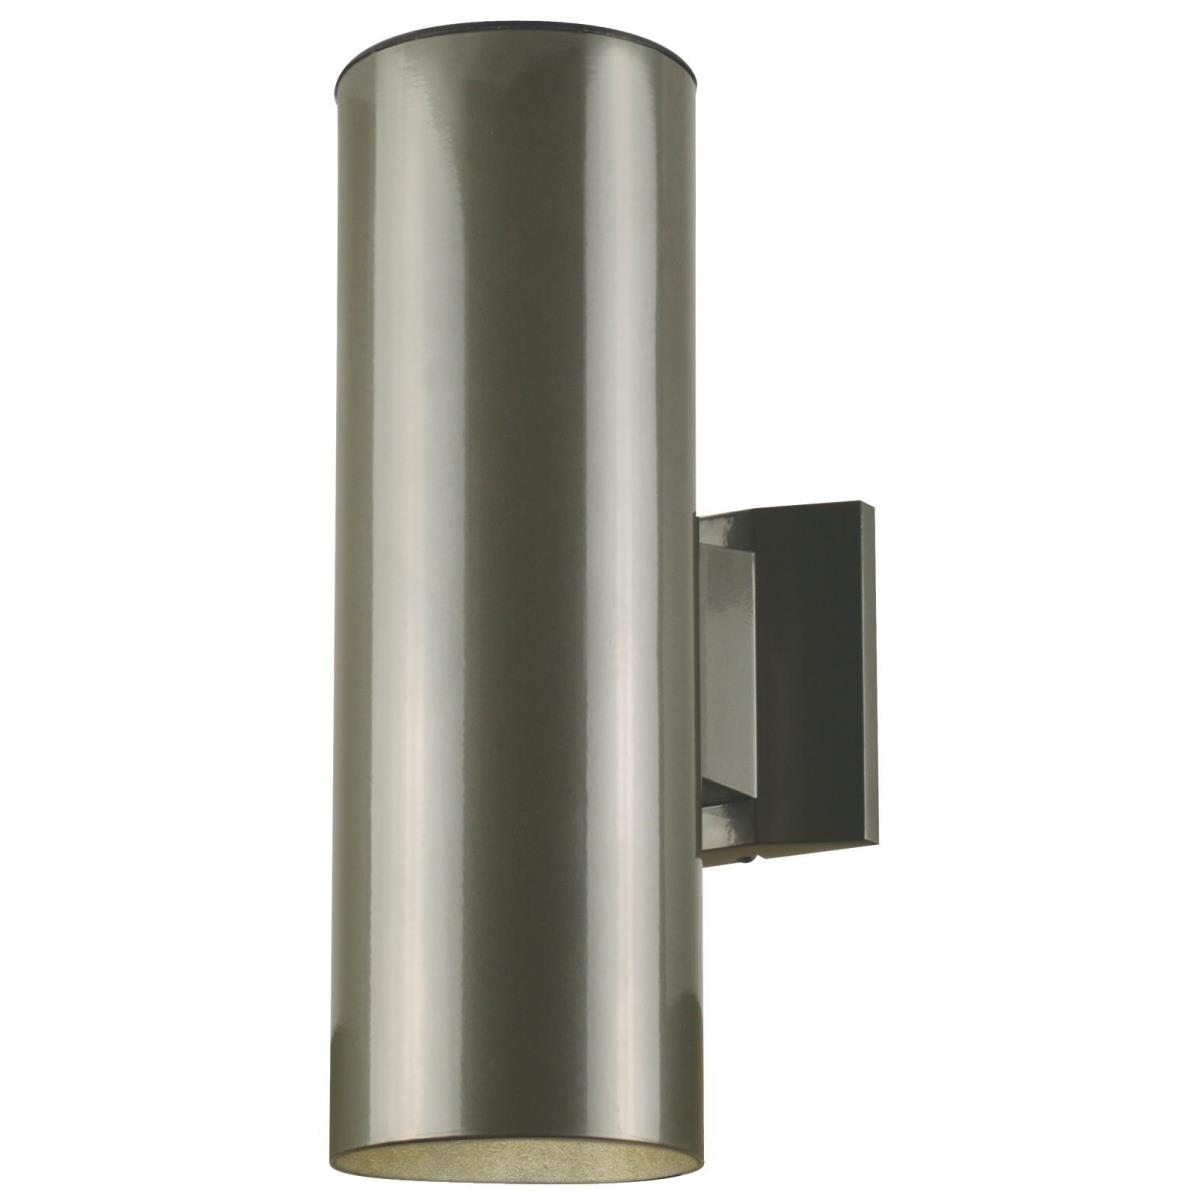 2 Light Up and Down Light Wall Fixture Polished Graphite Finish